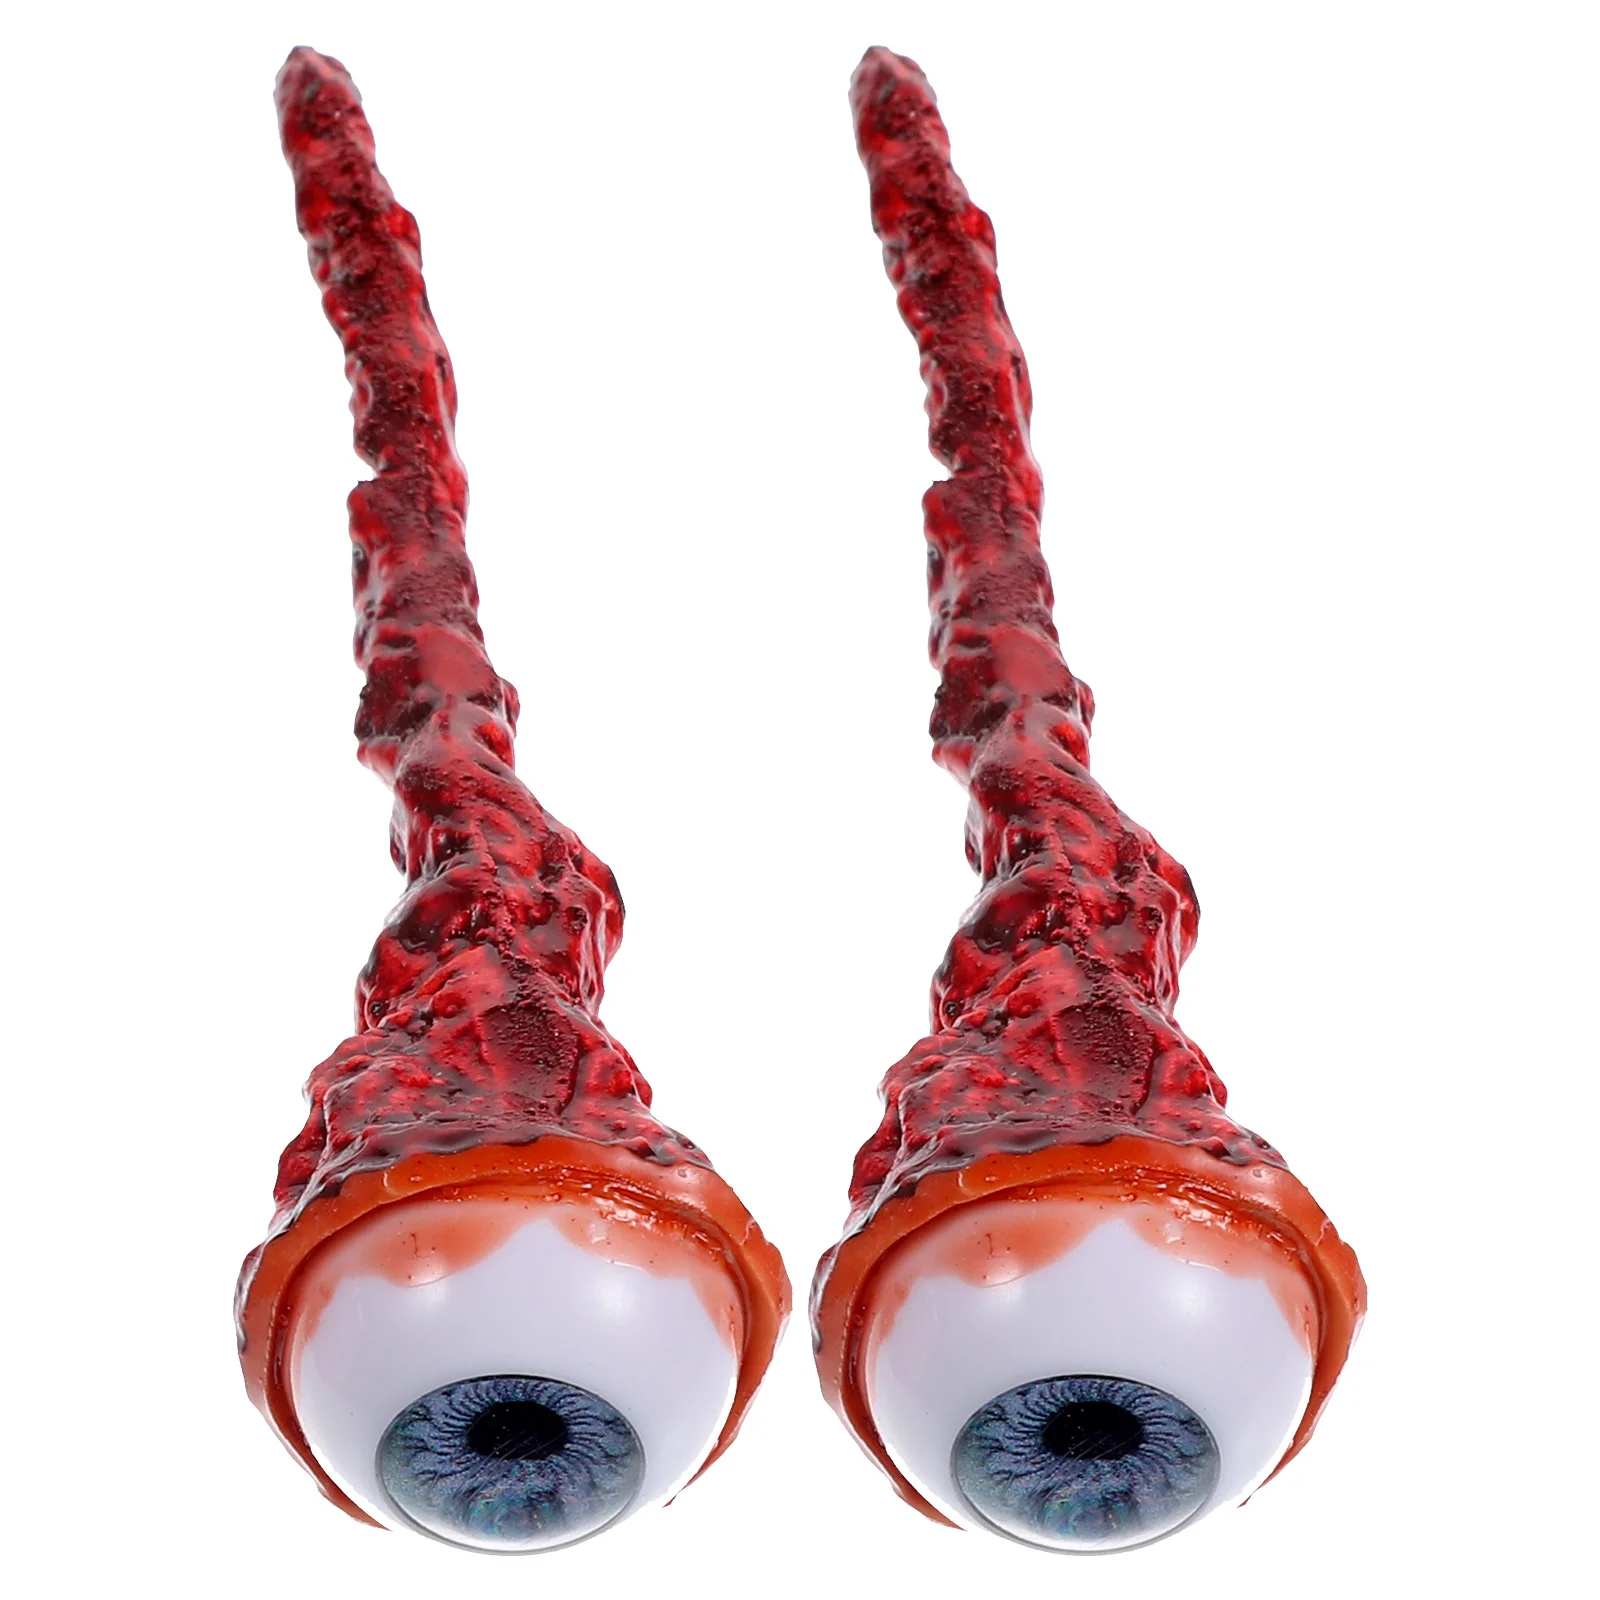 

2 Pcs Fake Eyeball Halloween Decoration Gathering Props Party Accessory Latex Outdoor Toy Eyeballs Decorations Playing Horror